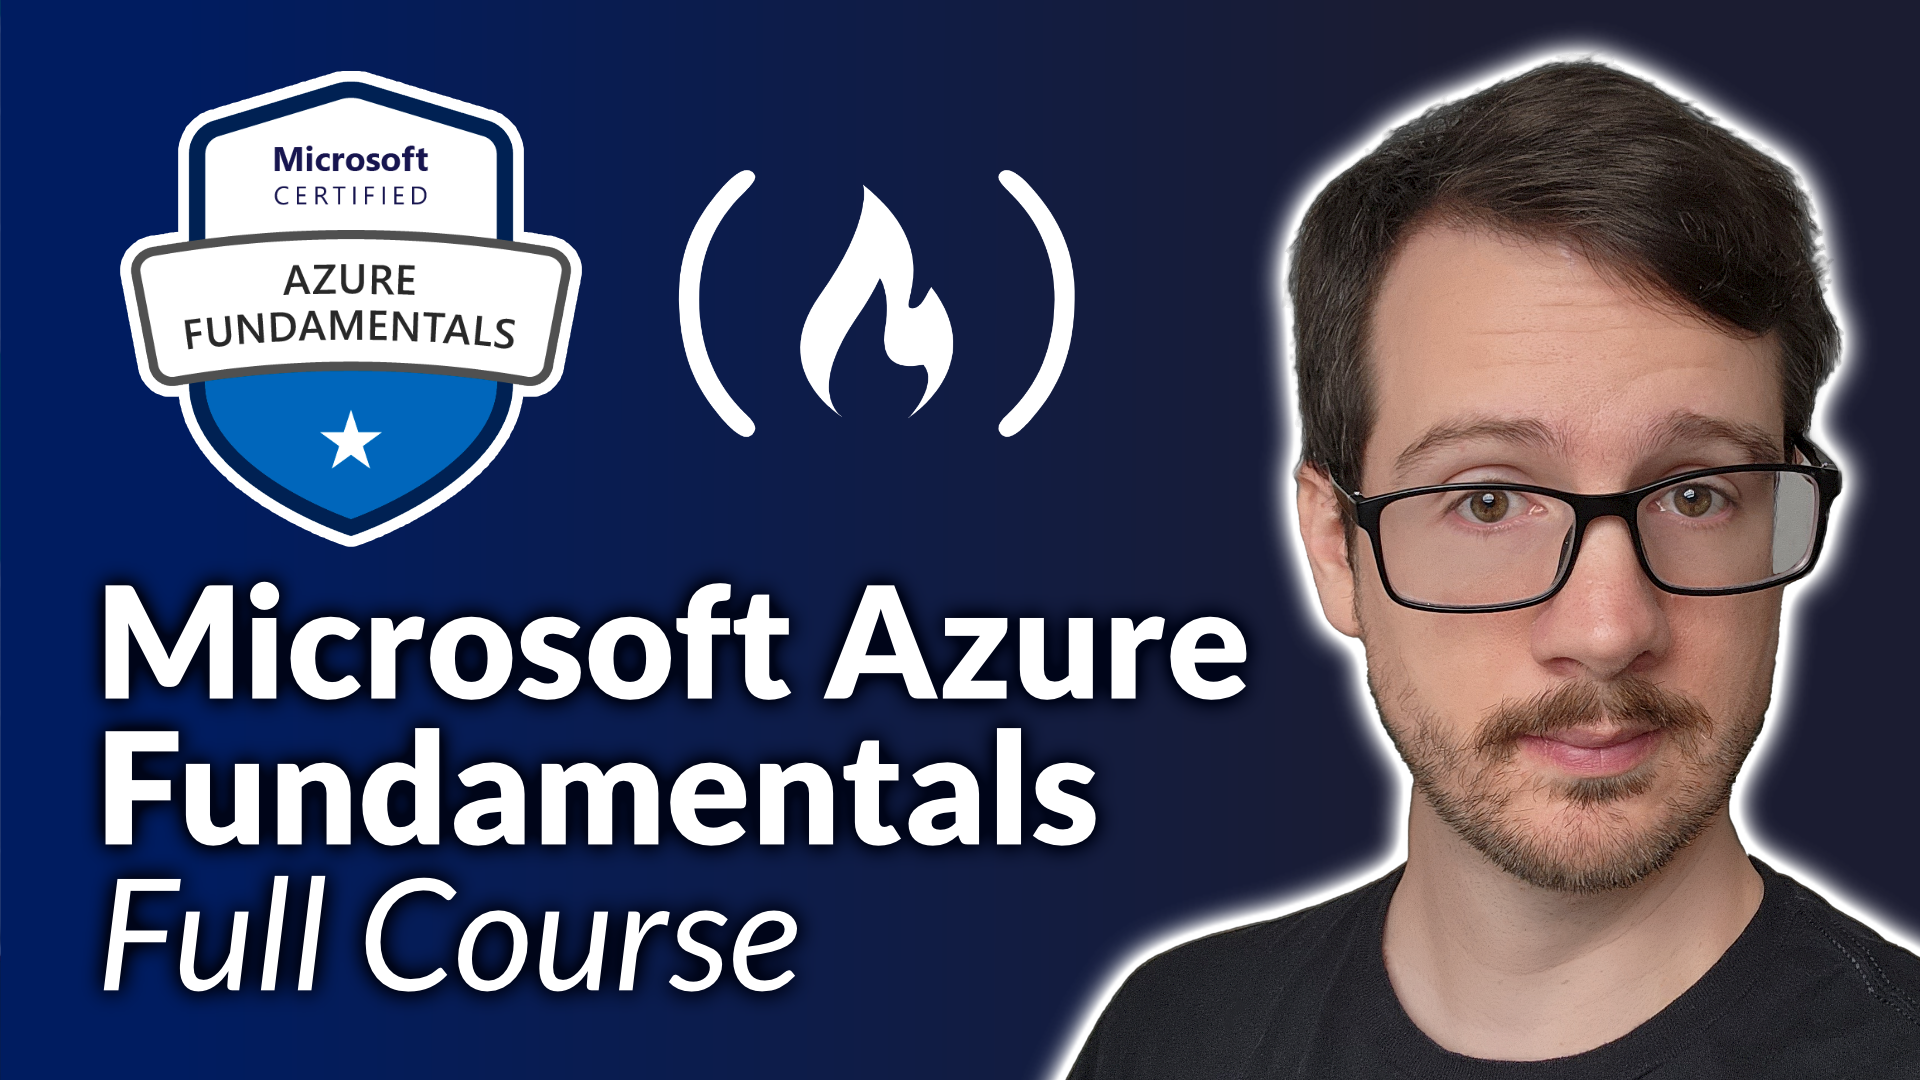 Azure Fundamentals Certification (AZ-900) – Pass the Exam With This Free 8-Hour Course